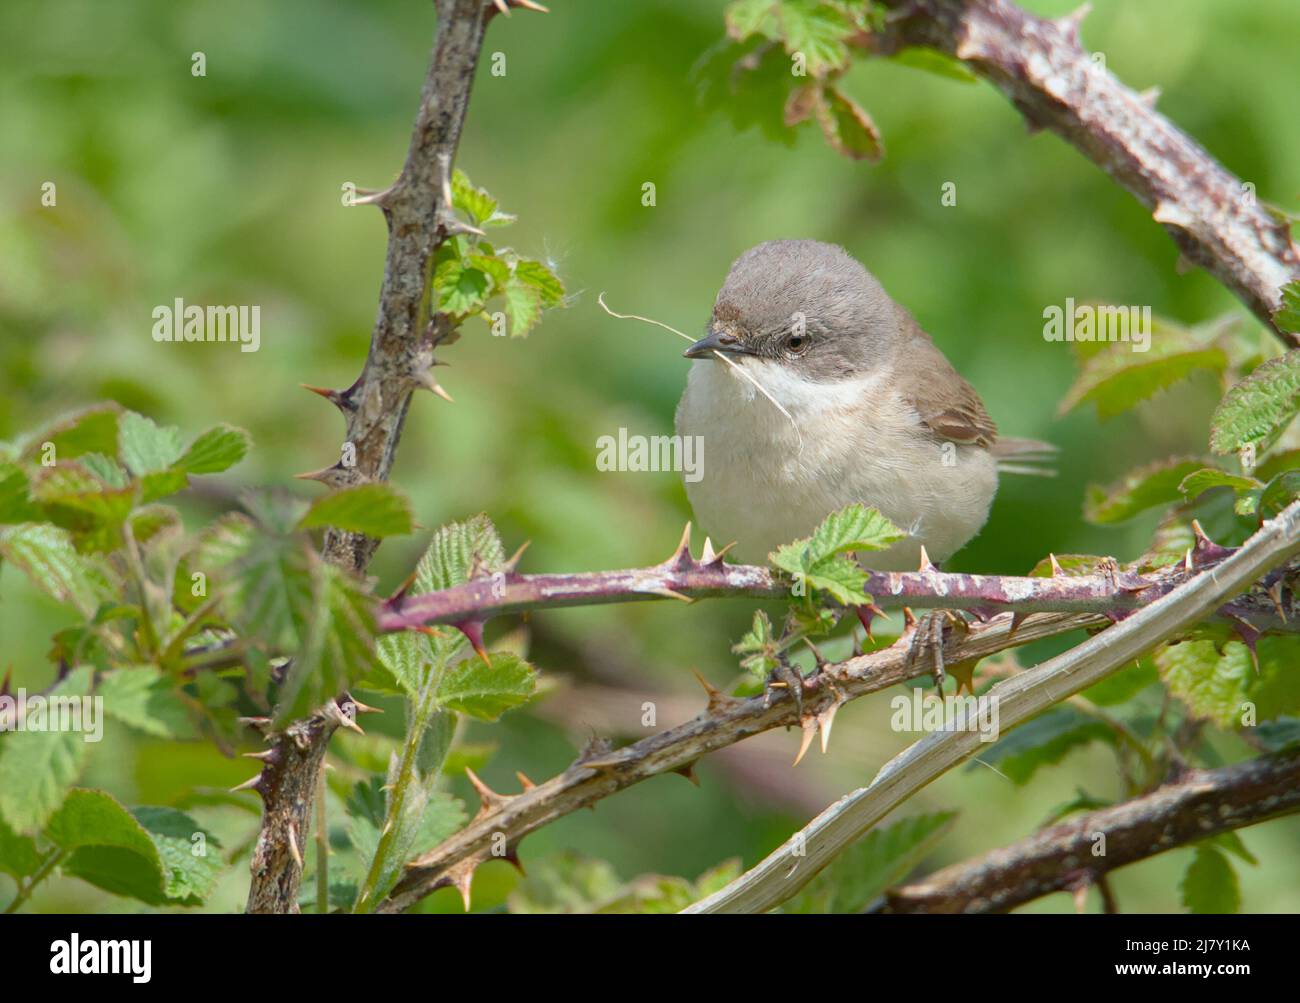 Lesser Whitethroat, Sylvia curruca, Sitting On Brambles With Piece Of Straw In Its Beak, Nesting Material, UK Stock Photo